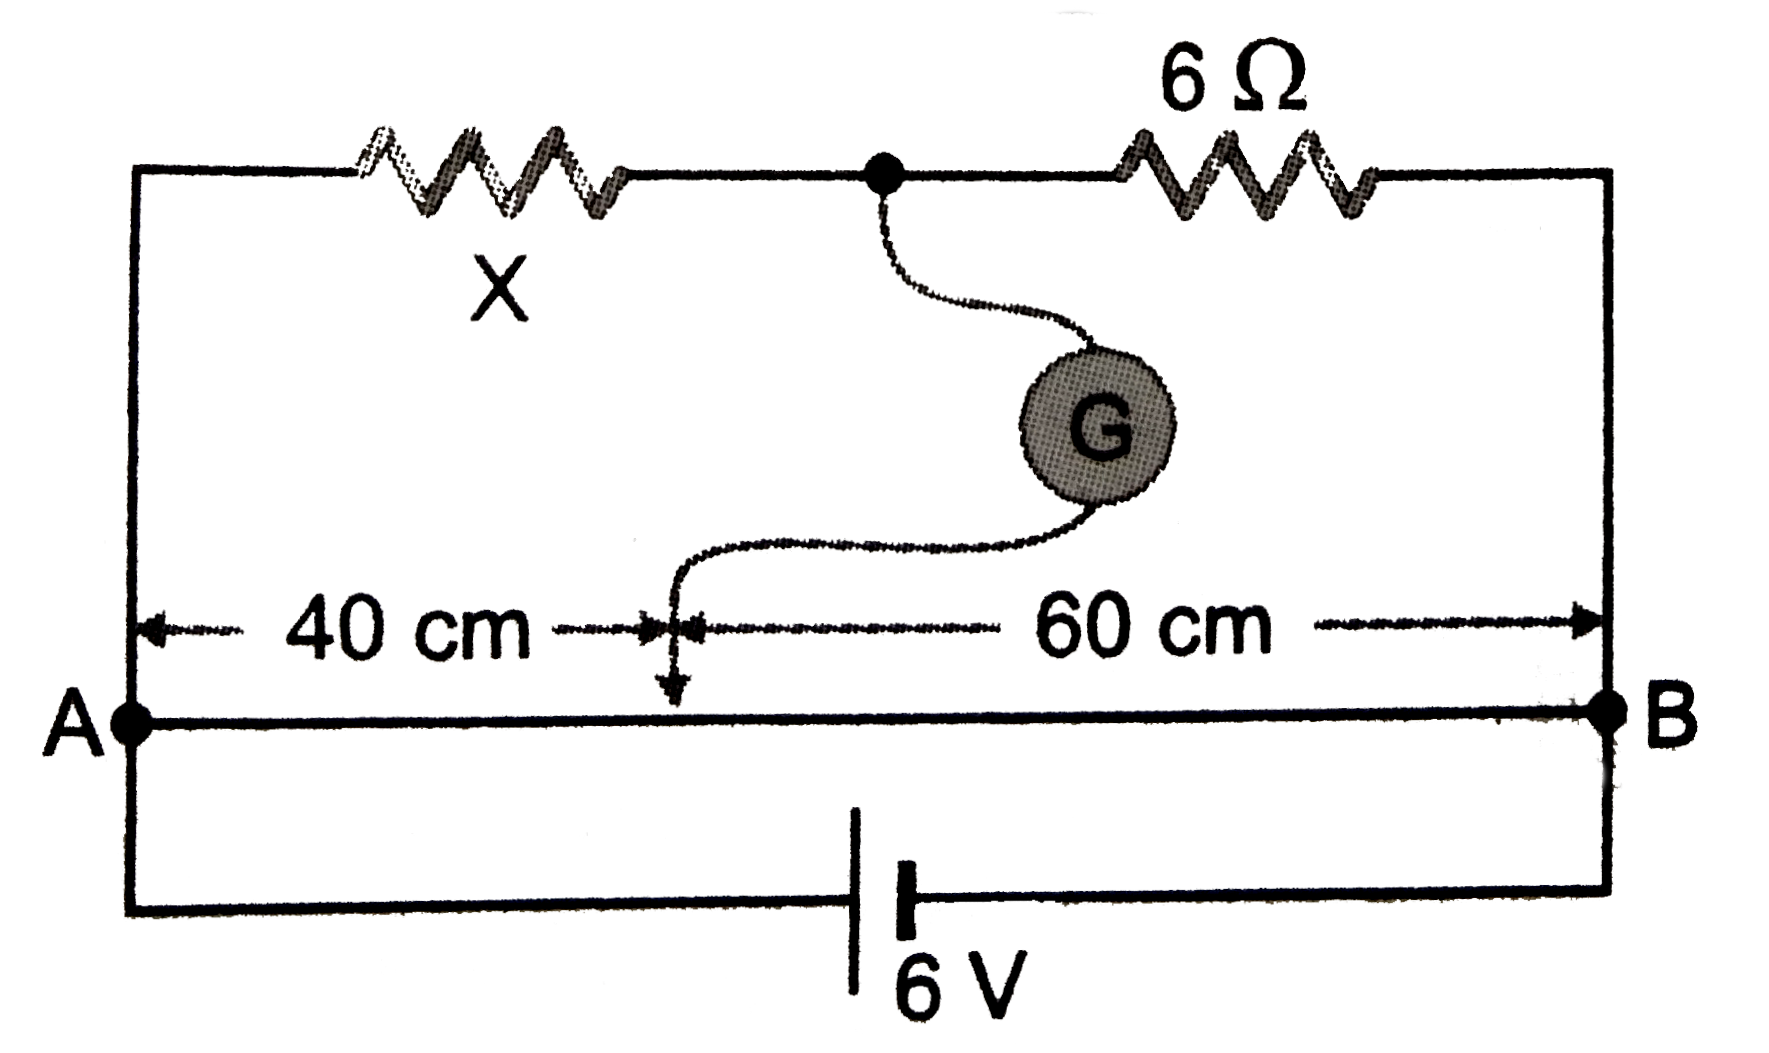 In the circuit a meter bridge a shown in the balanced state .The meter bridge wire  has a resistance of 1 Omega //cm. Calculate the unknown resistance Y and the current drawn from the battery of negiligible internal resistance